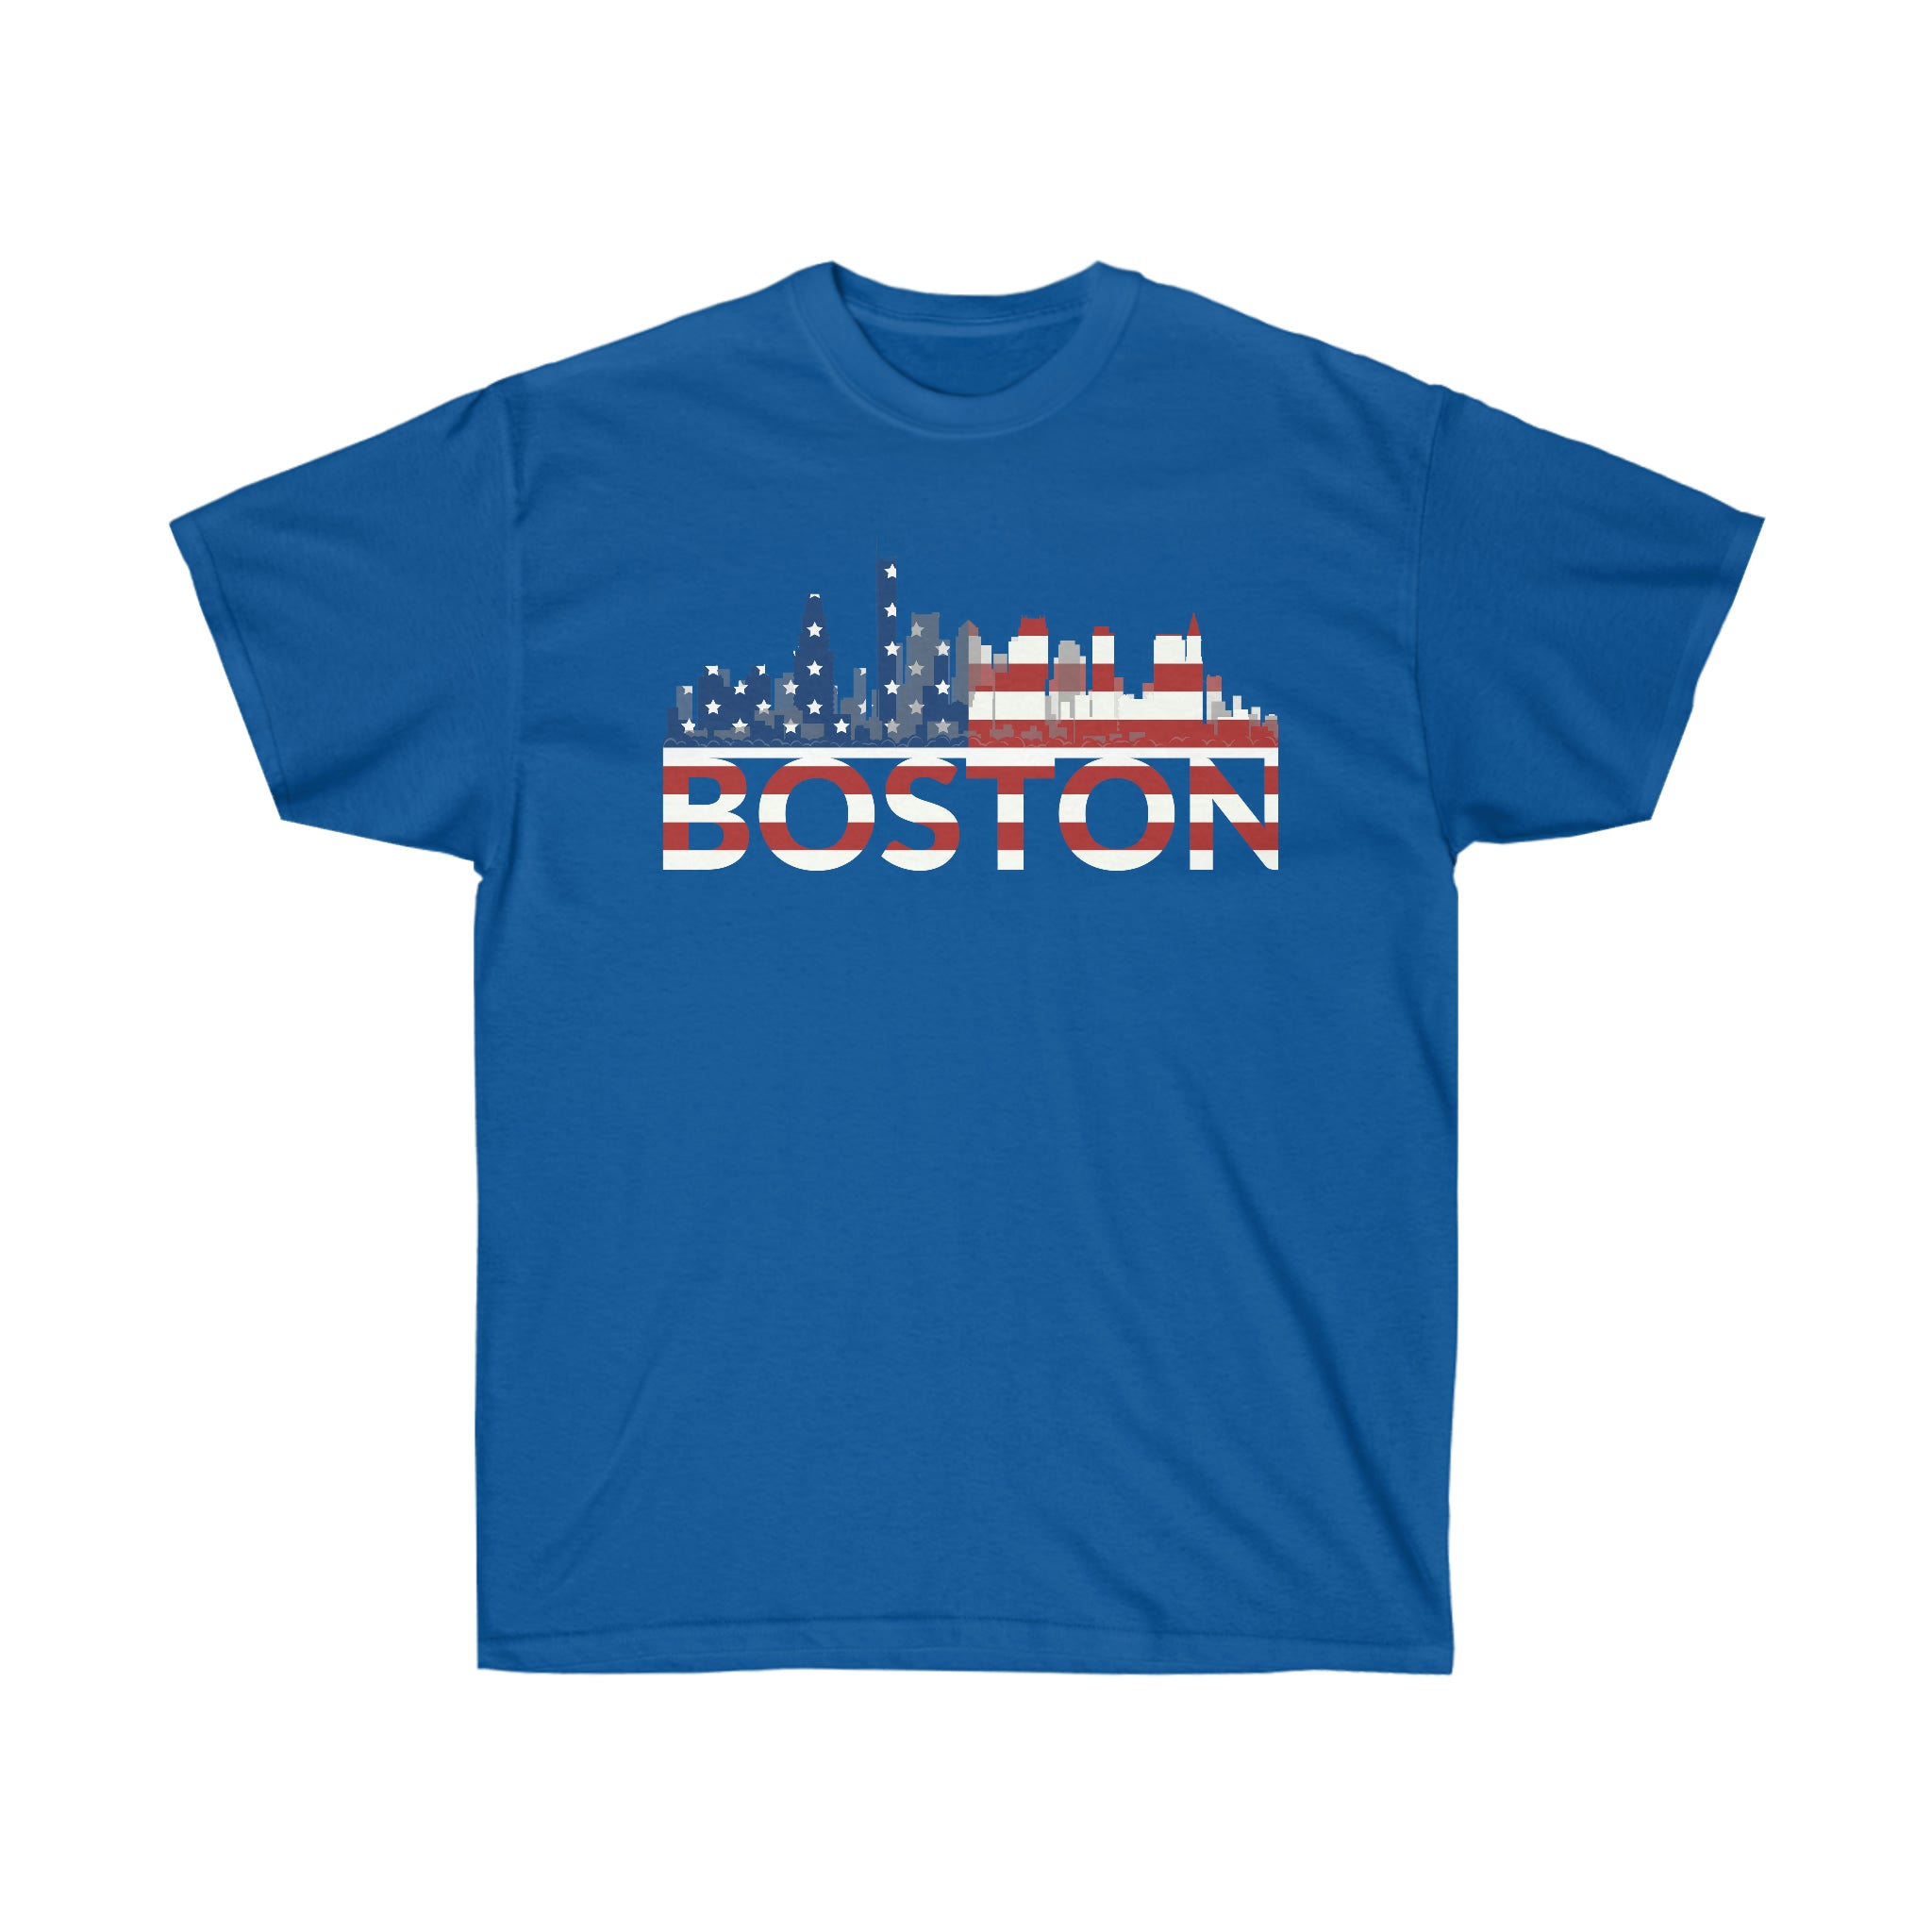 Unisex Ultra Cotton Tee "Higher Quality Materials"(BOSTON)